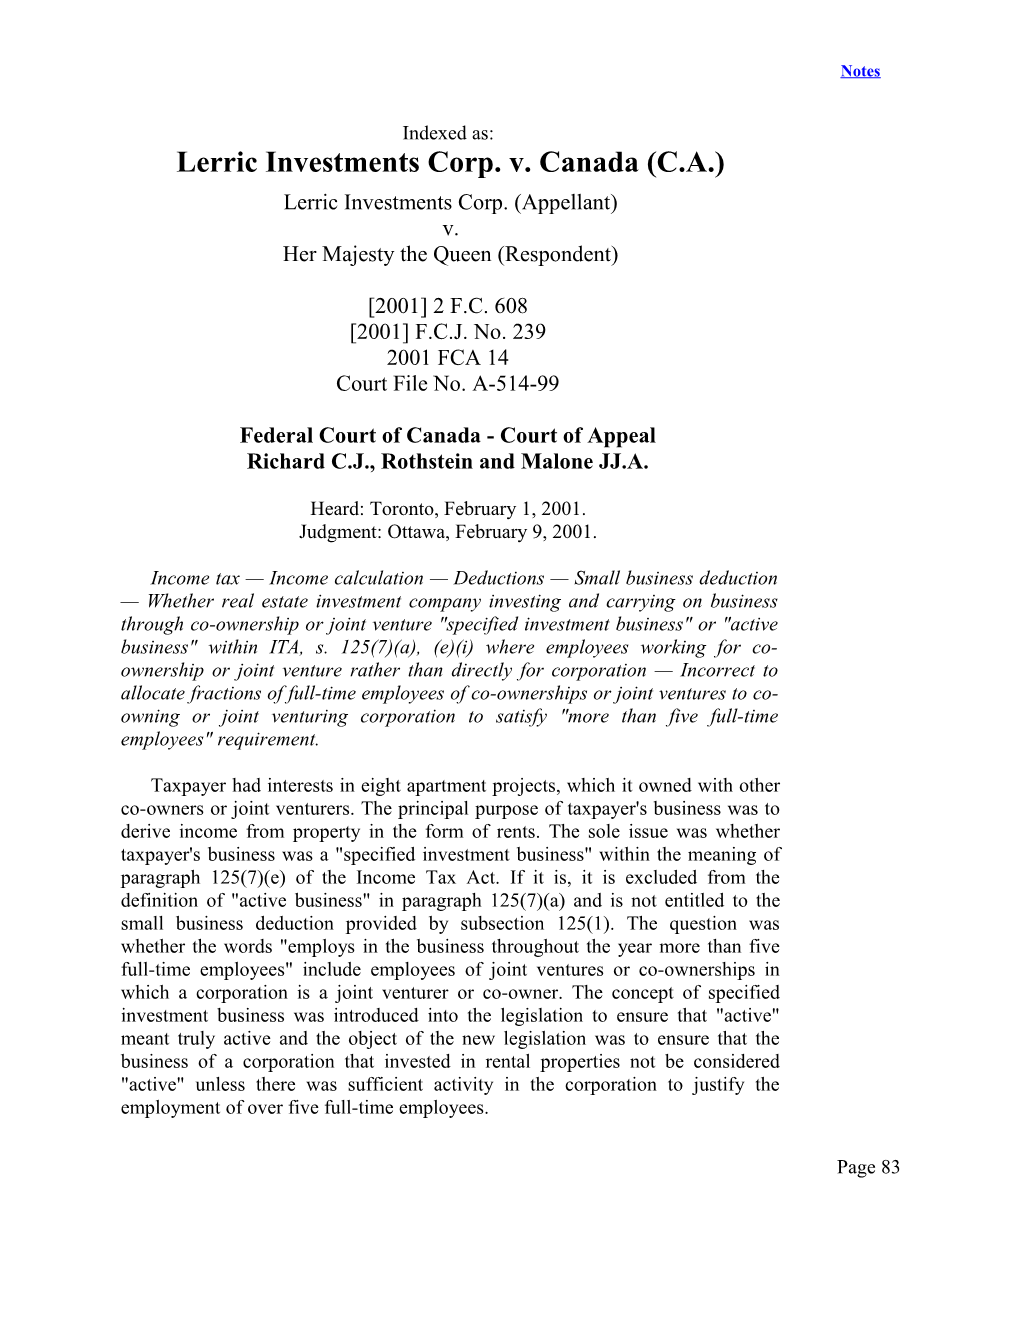 Indexed As: Lerric Investments Corp. V. Canada (C.A.)